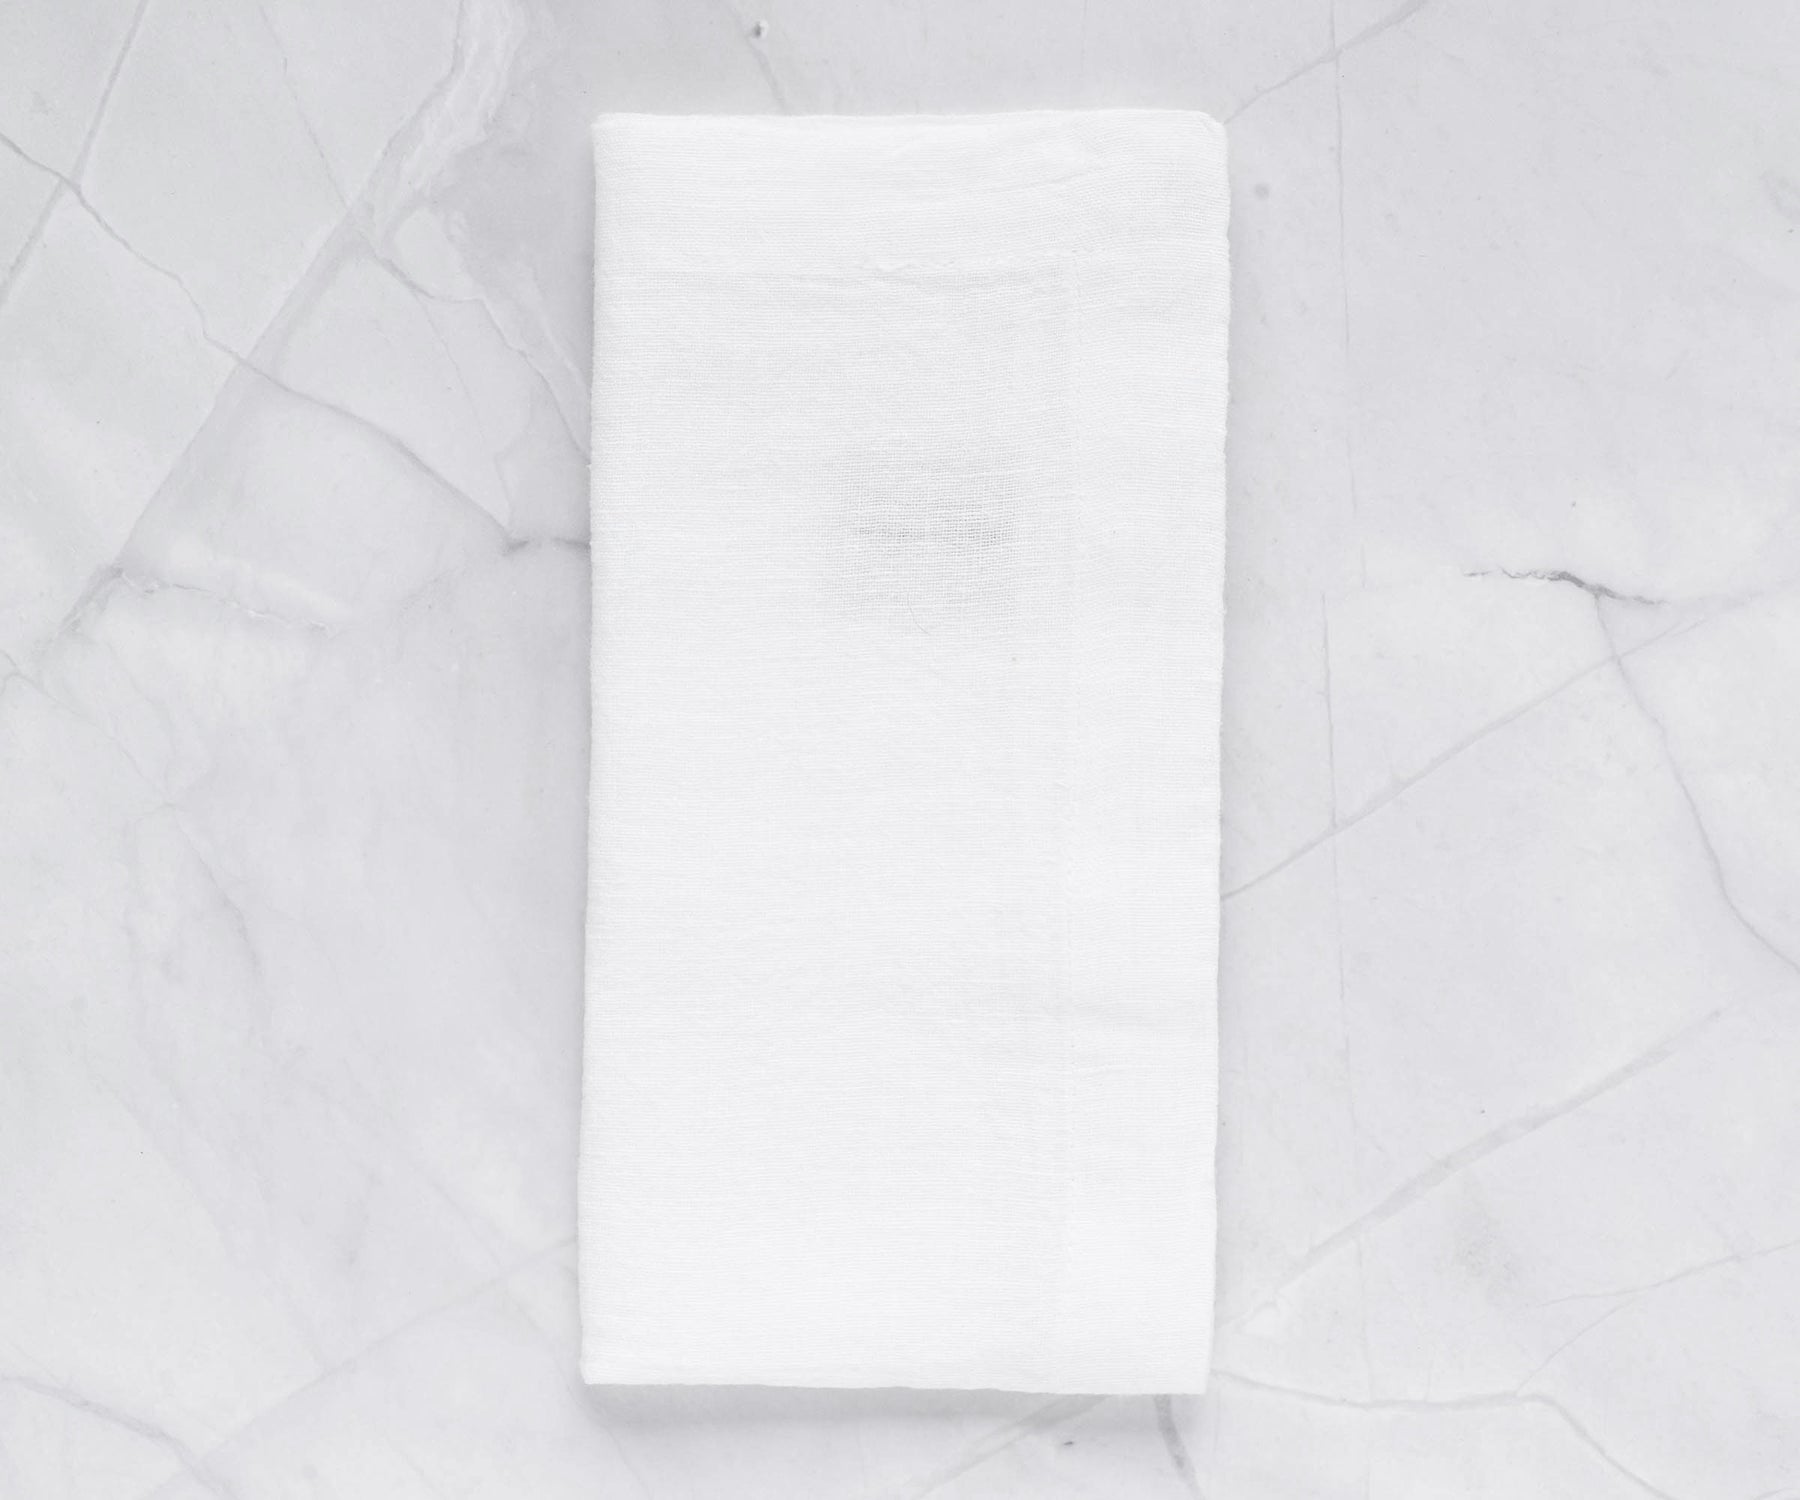 White linen napkin resting on a marble surface with soft lighting